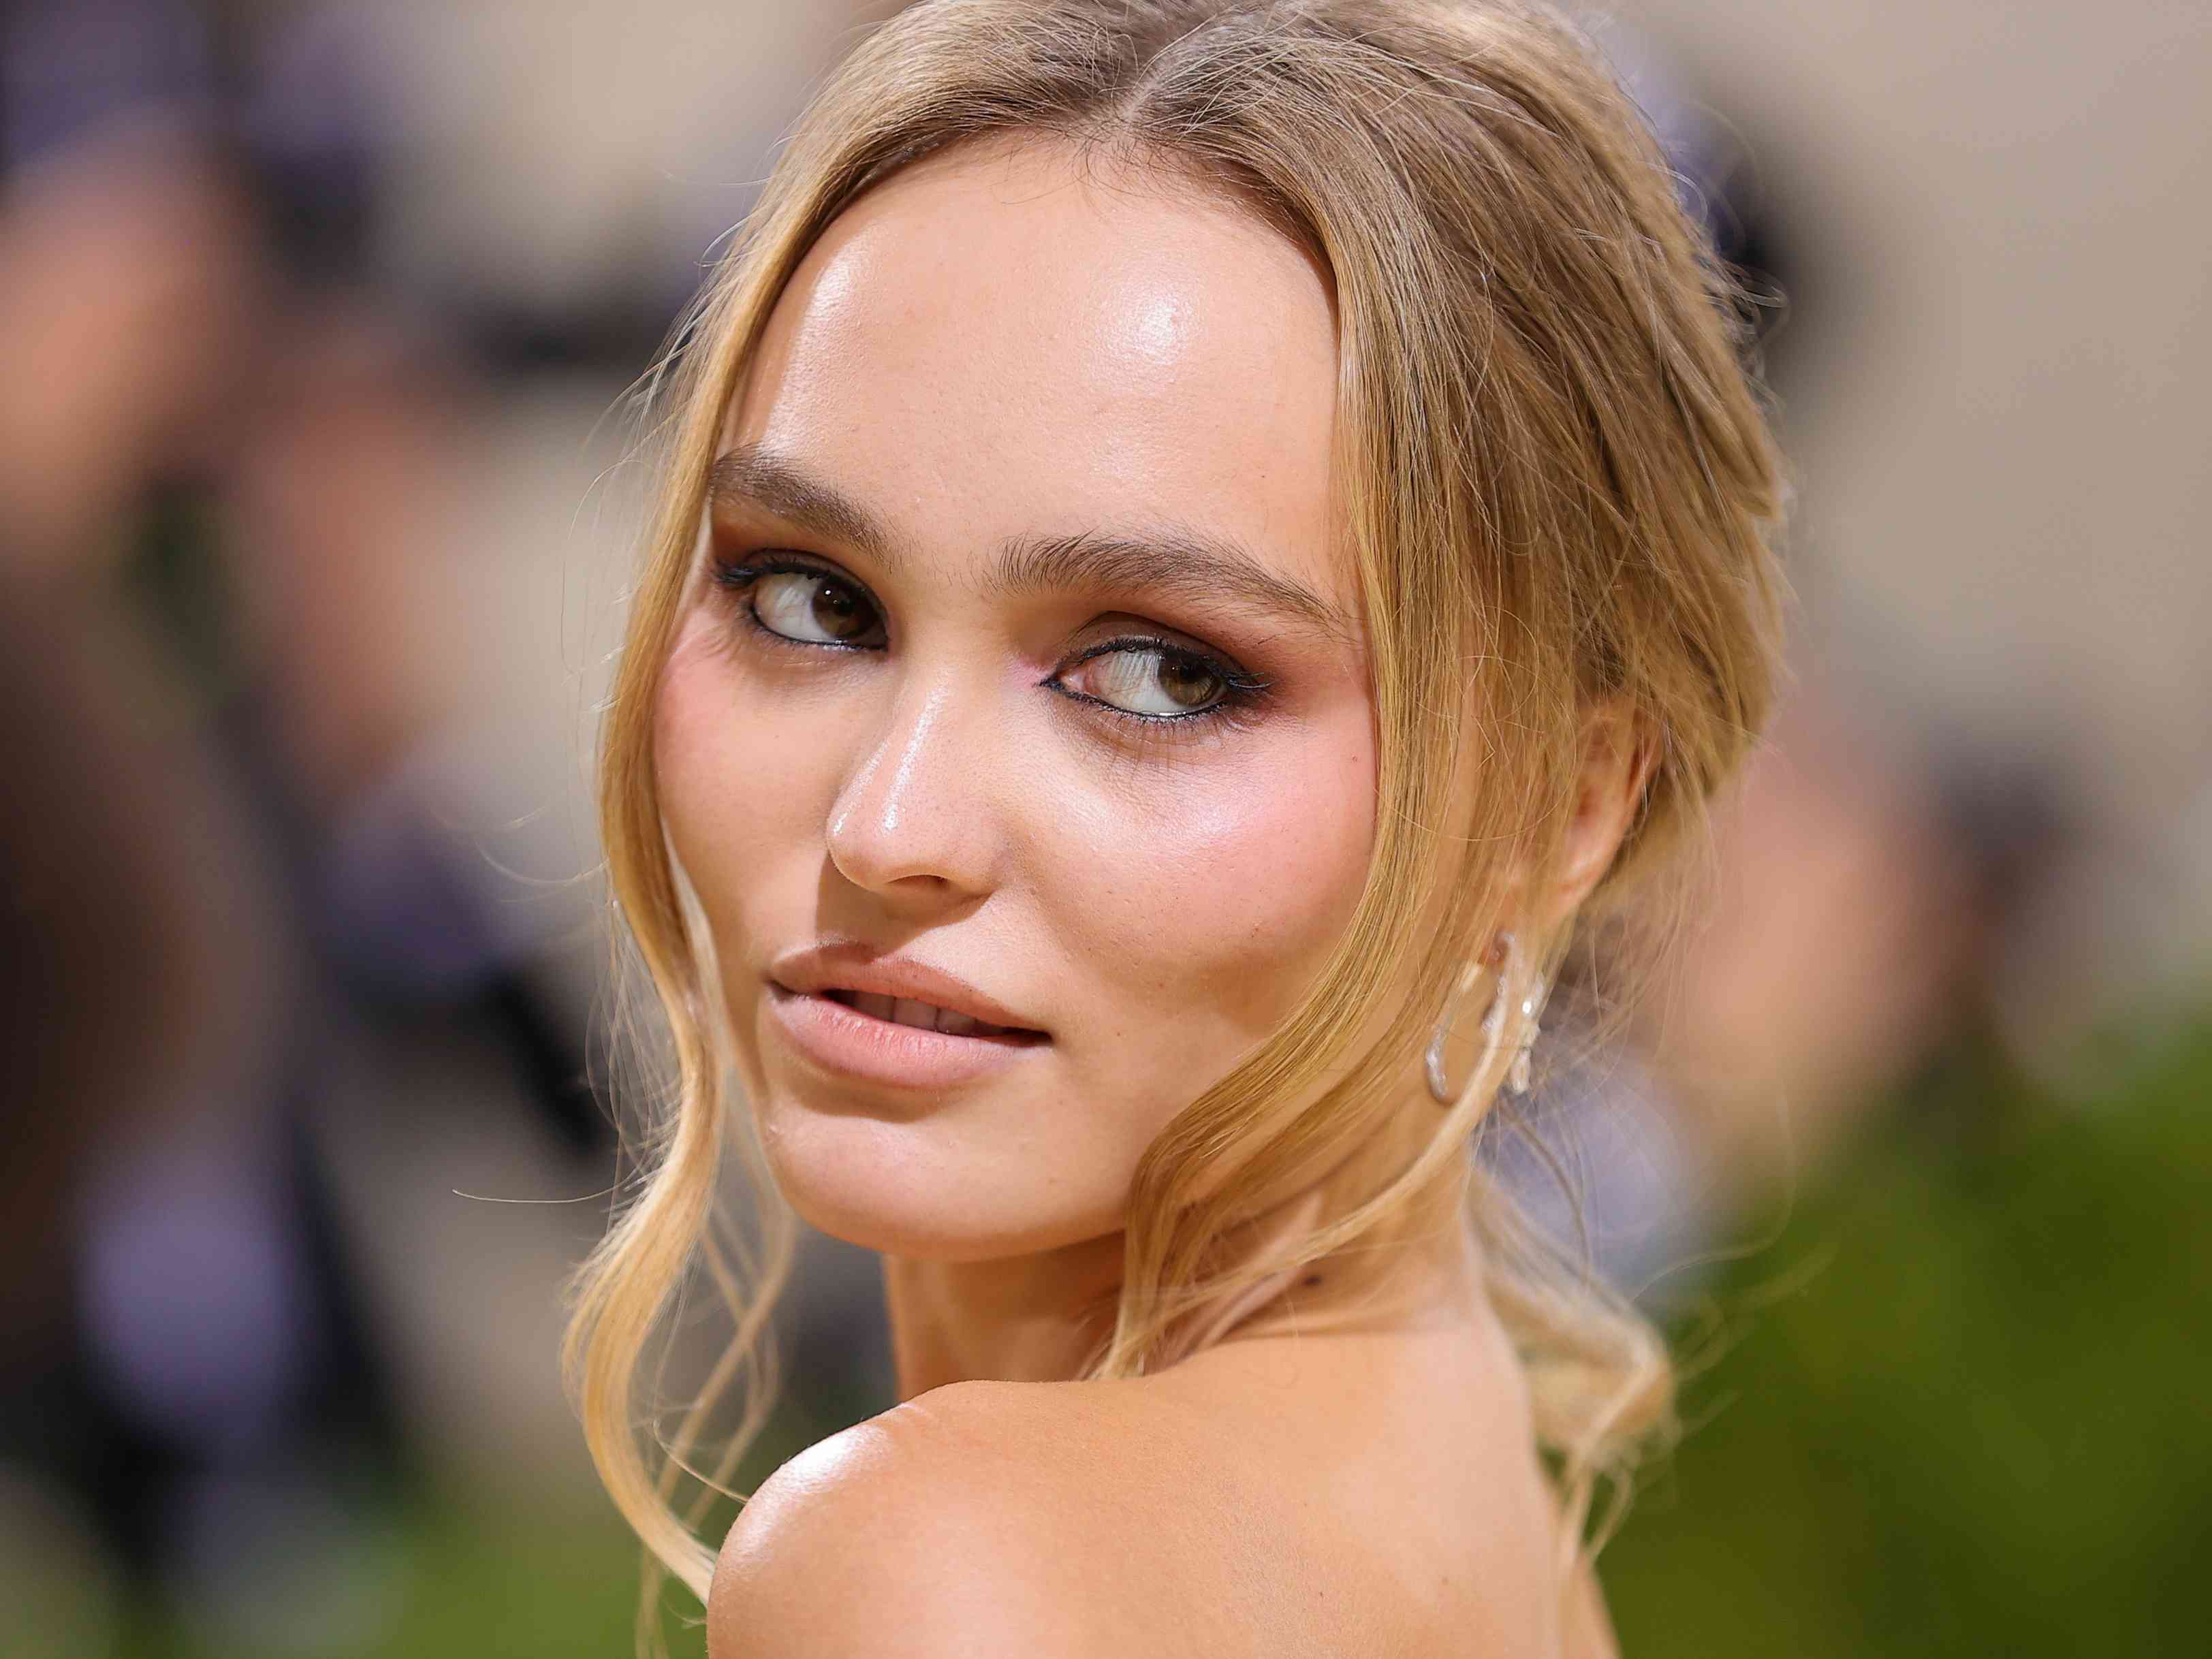 13 classic makeup looks you can wear forever